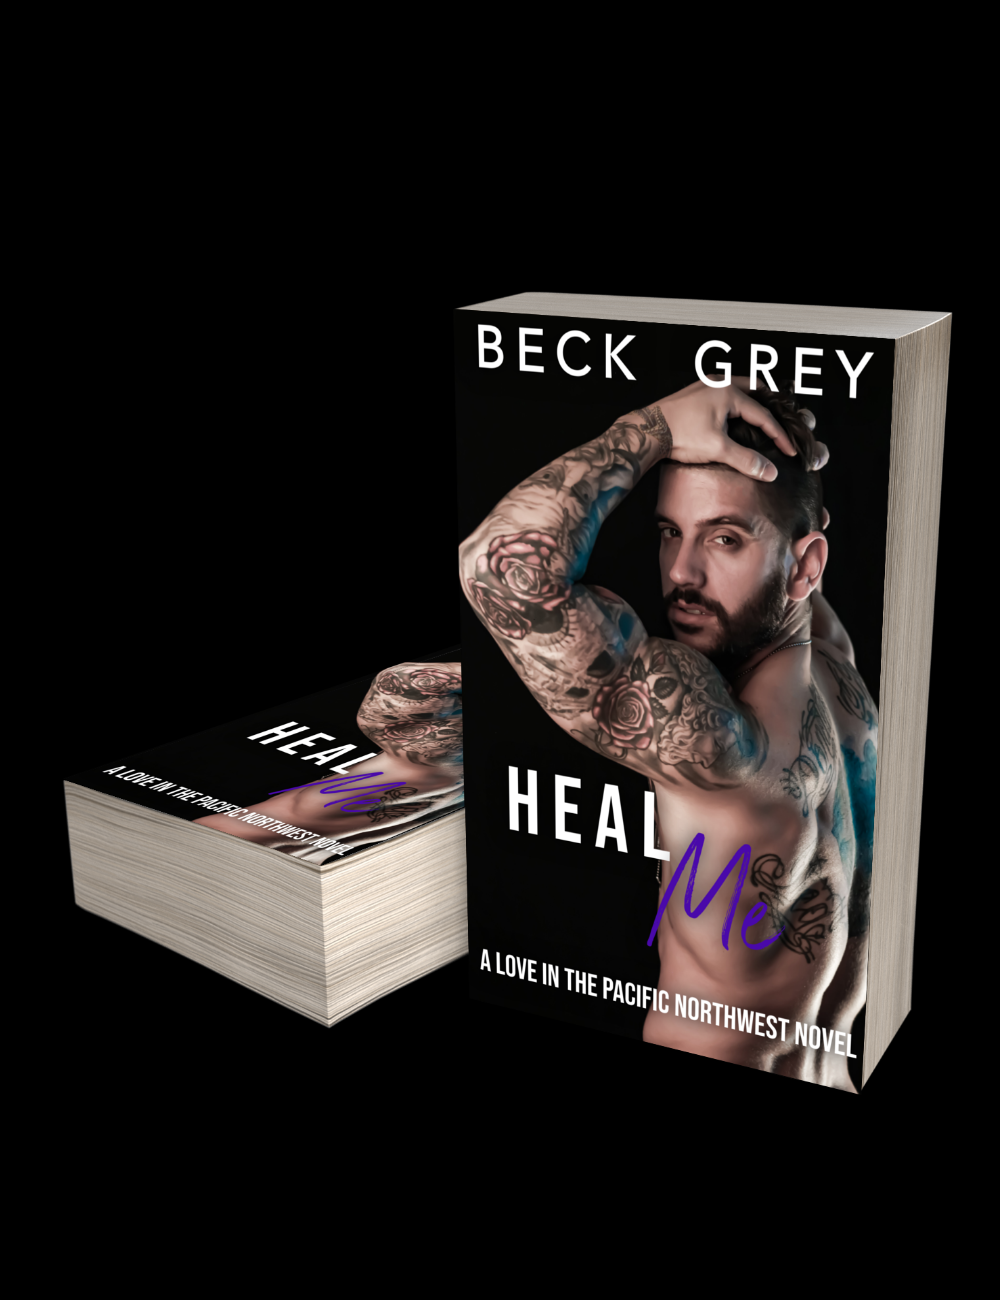 Beck Grey’s Heal Me paperback cover. A Love in the Pacific Northwest Novel. Shirtless Caucasian man in his thirties with short black hair, close beard and mustache. Arms up, hand in hair, looking over his shoulder. Tattoos on arms and entire back.